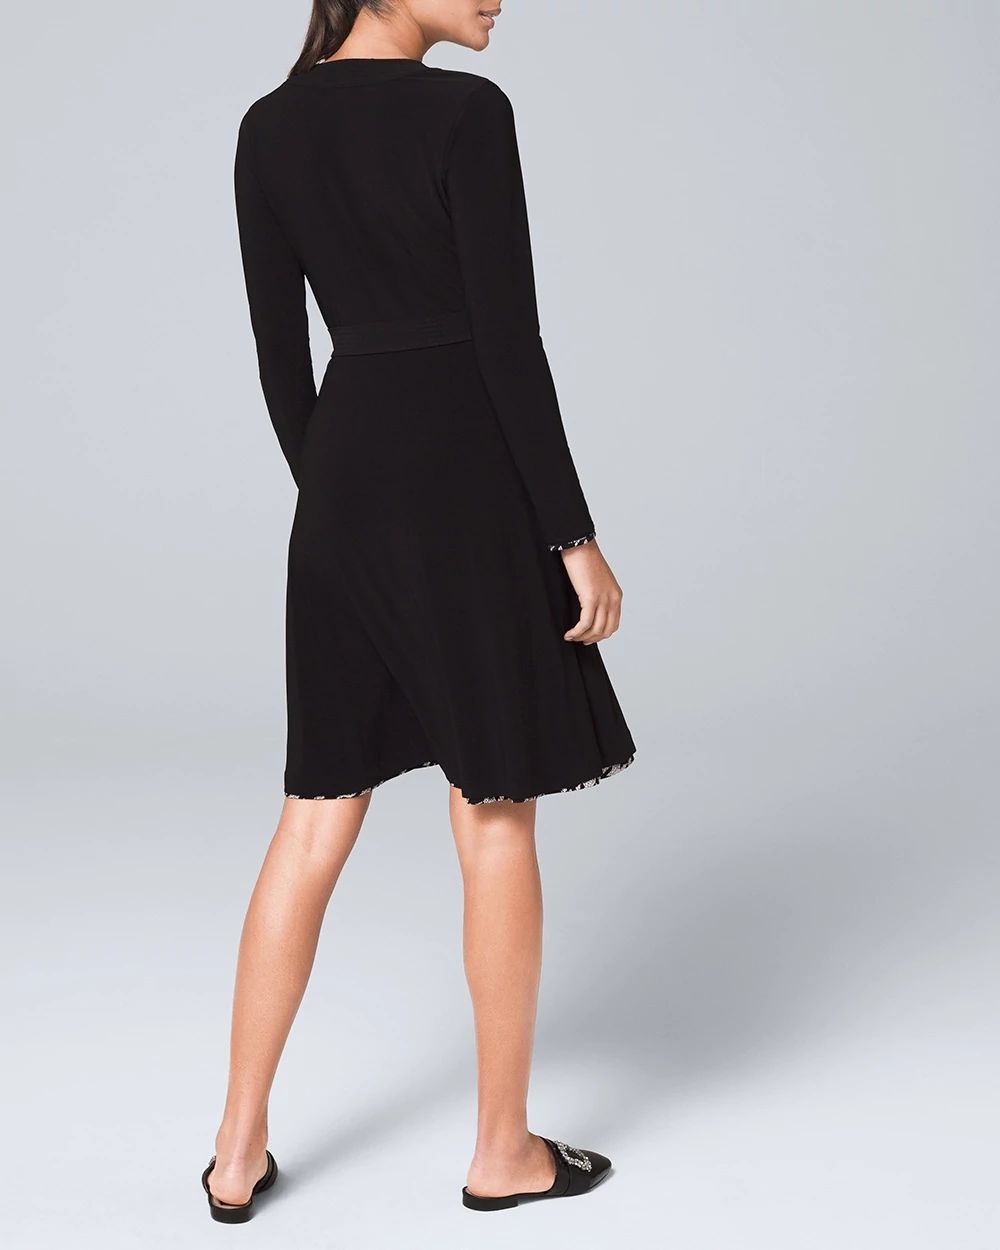 Long-Sleeve Reversible Matte Jersey Dress click to view larger image.